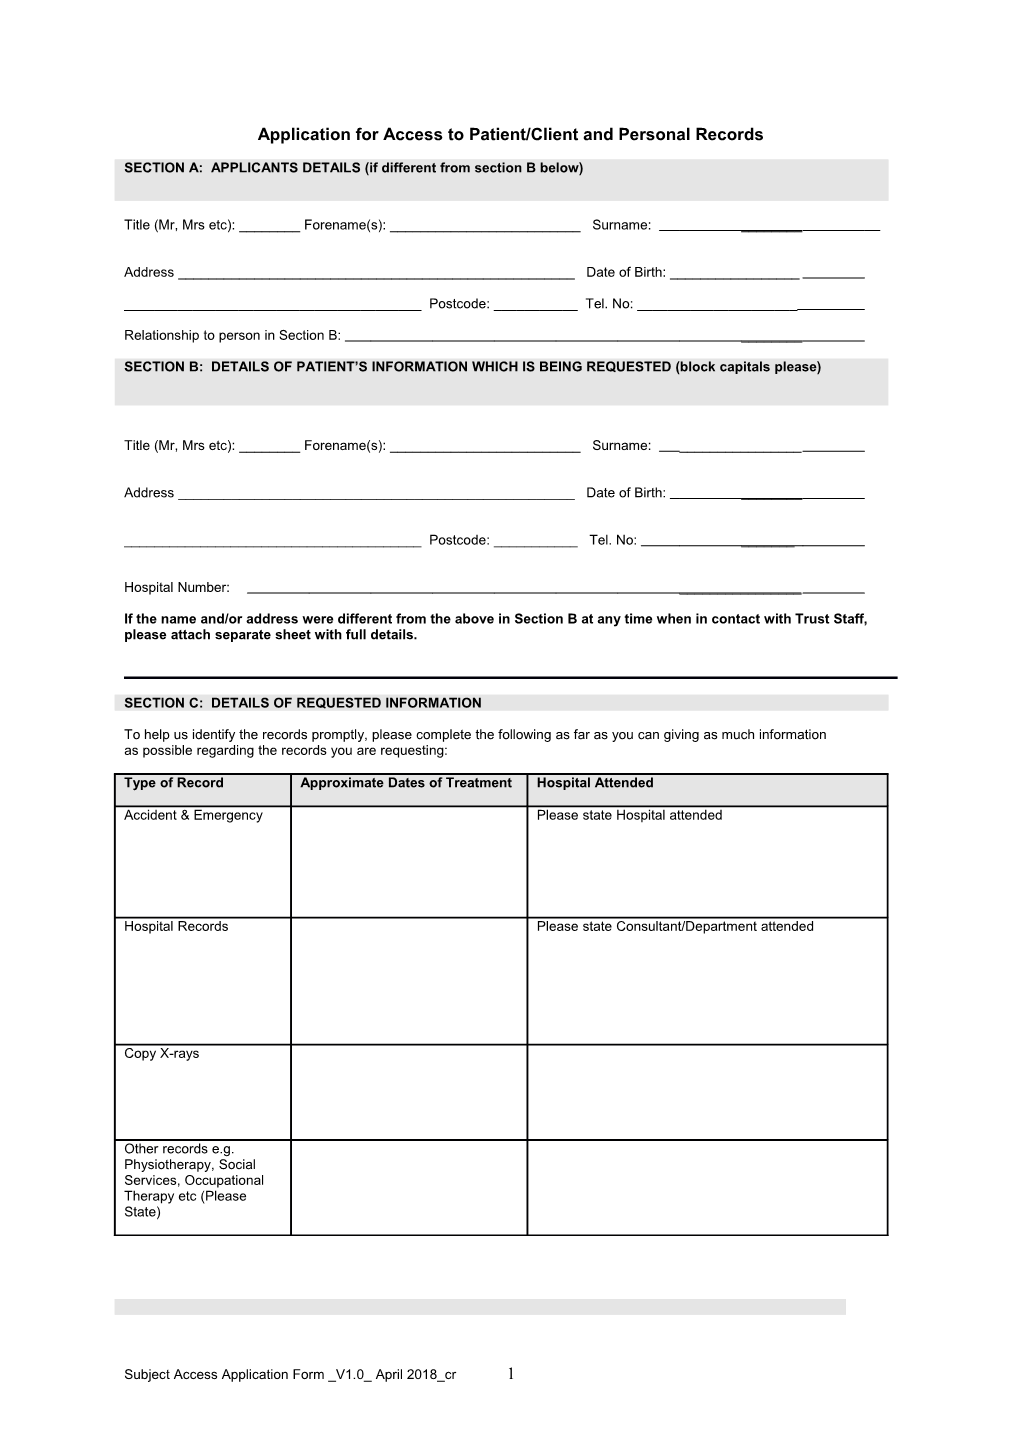 Application for Access to Patient/Client and Personal Records